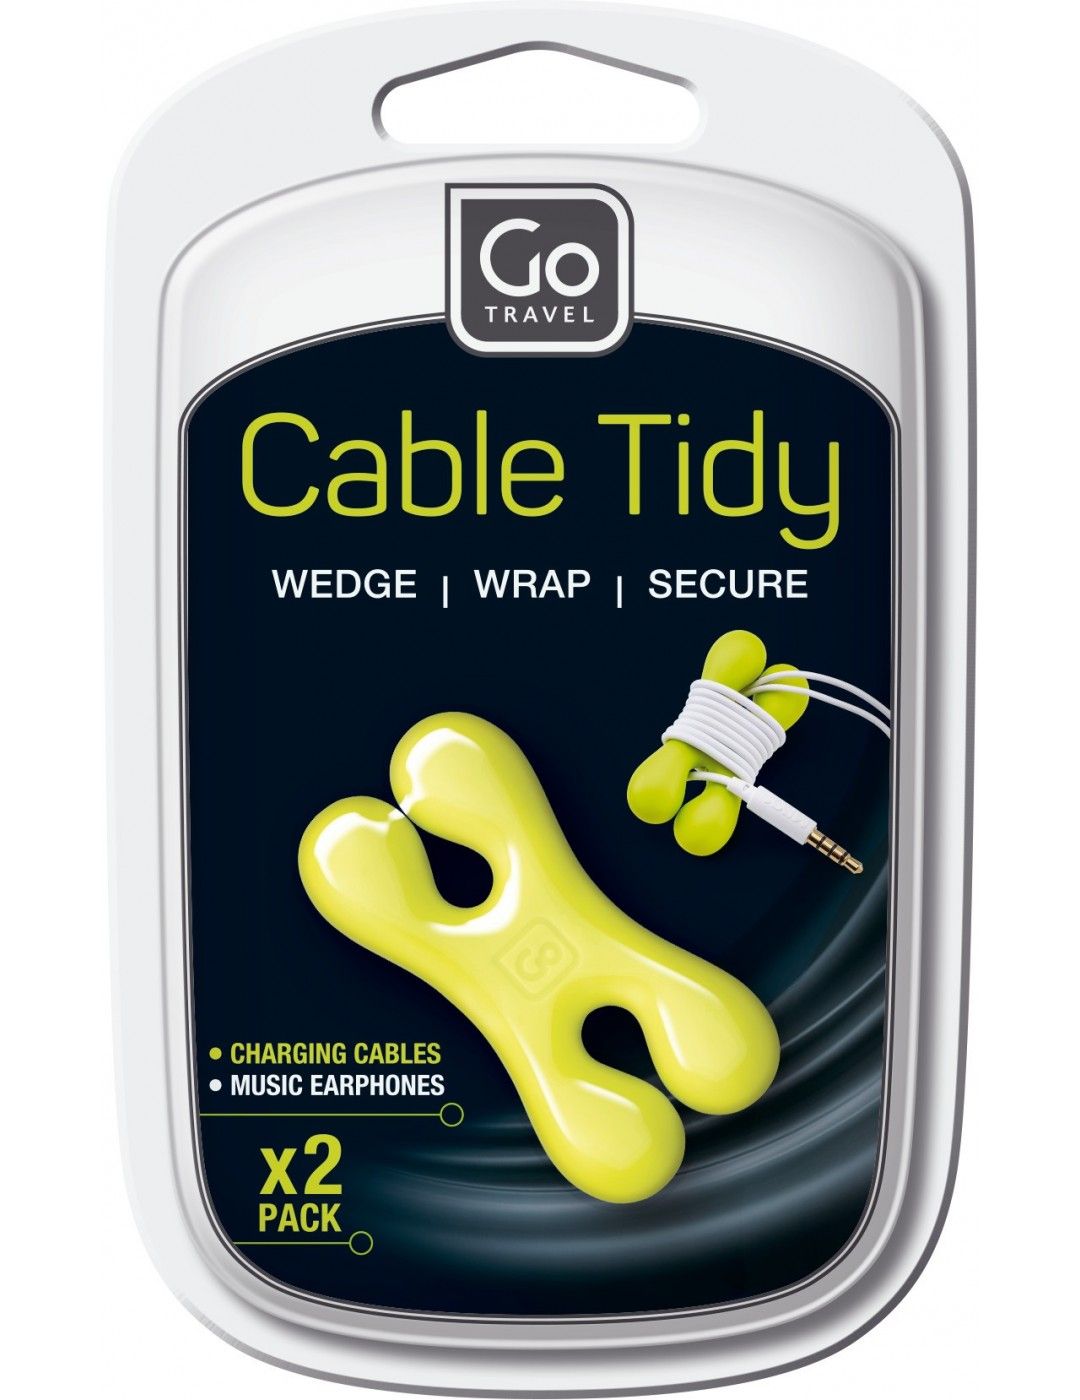 Go Travel Cable Order